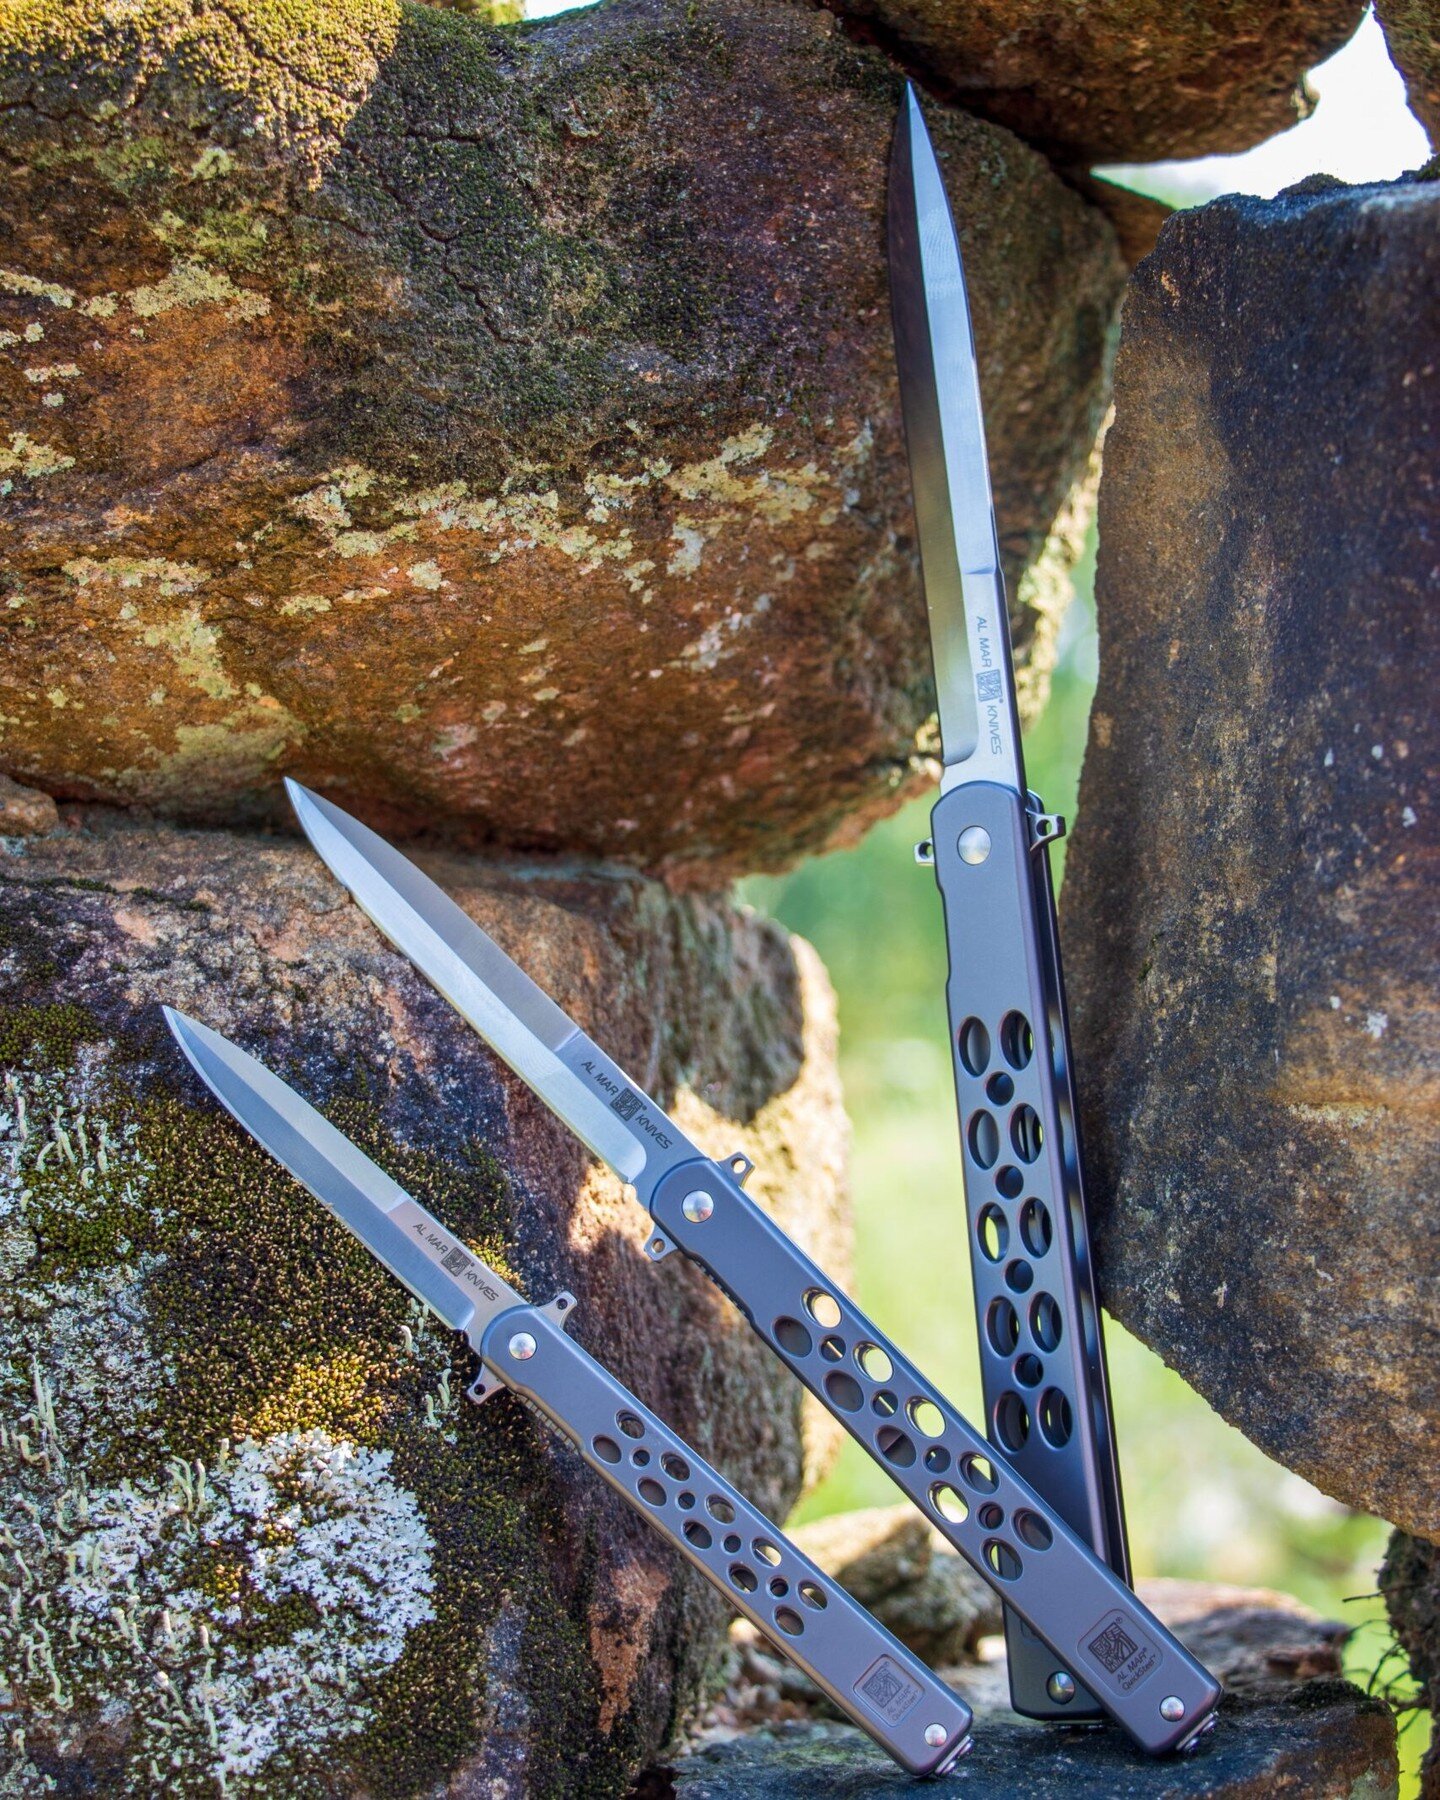 Sharp minds need sharp tools. Our QuickSteel series stay sculpting success, one cut at a time.